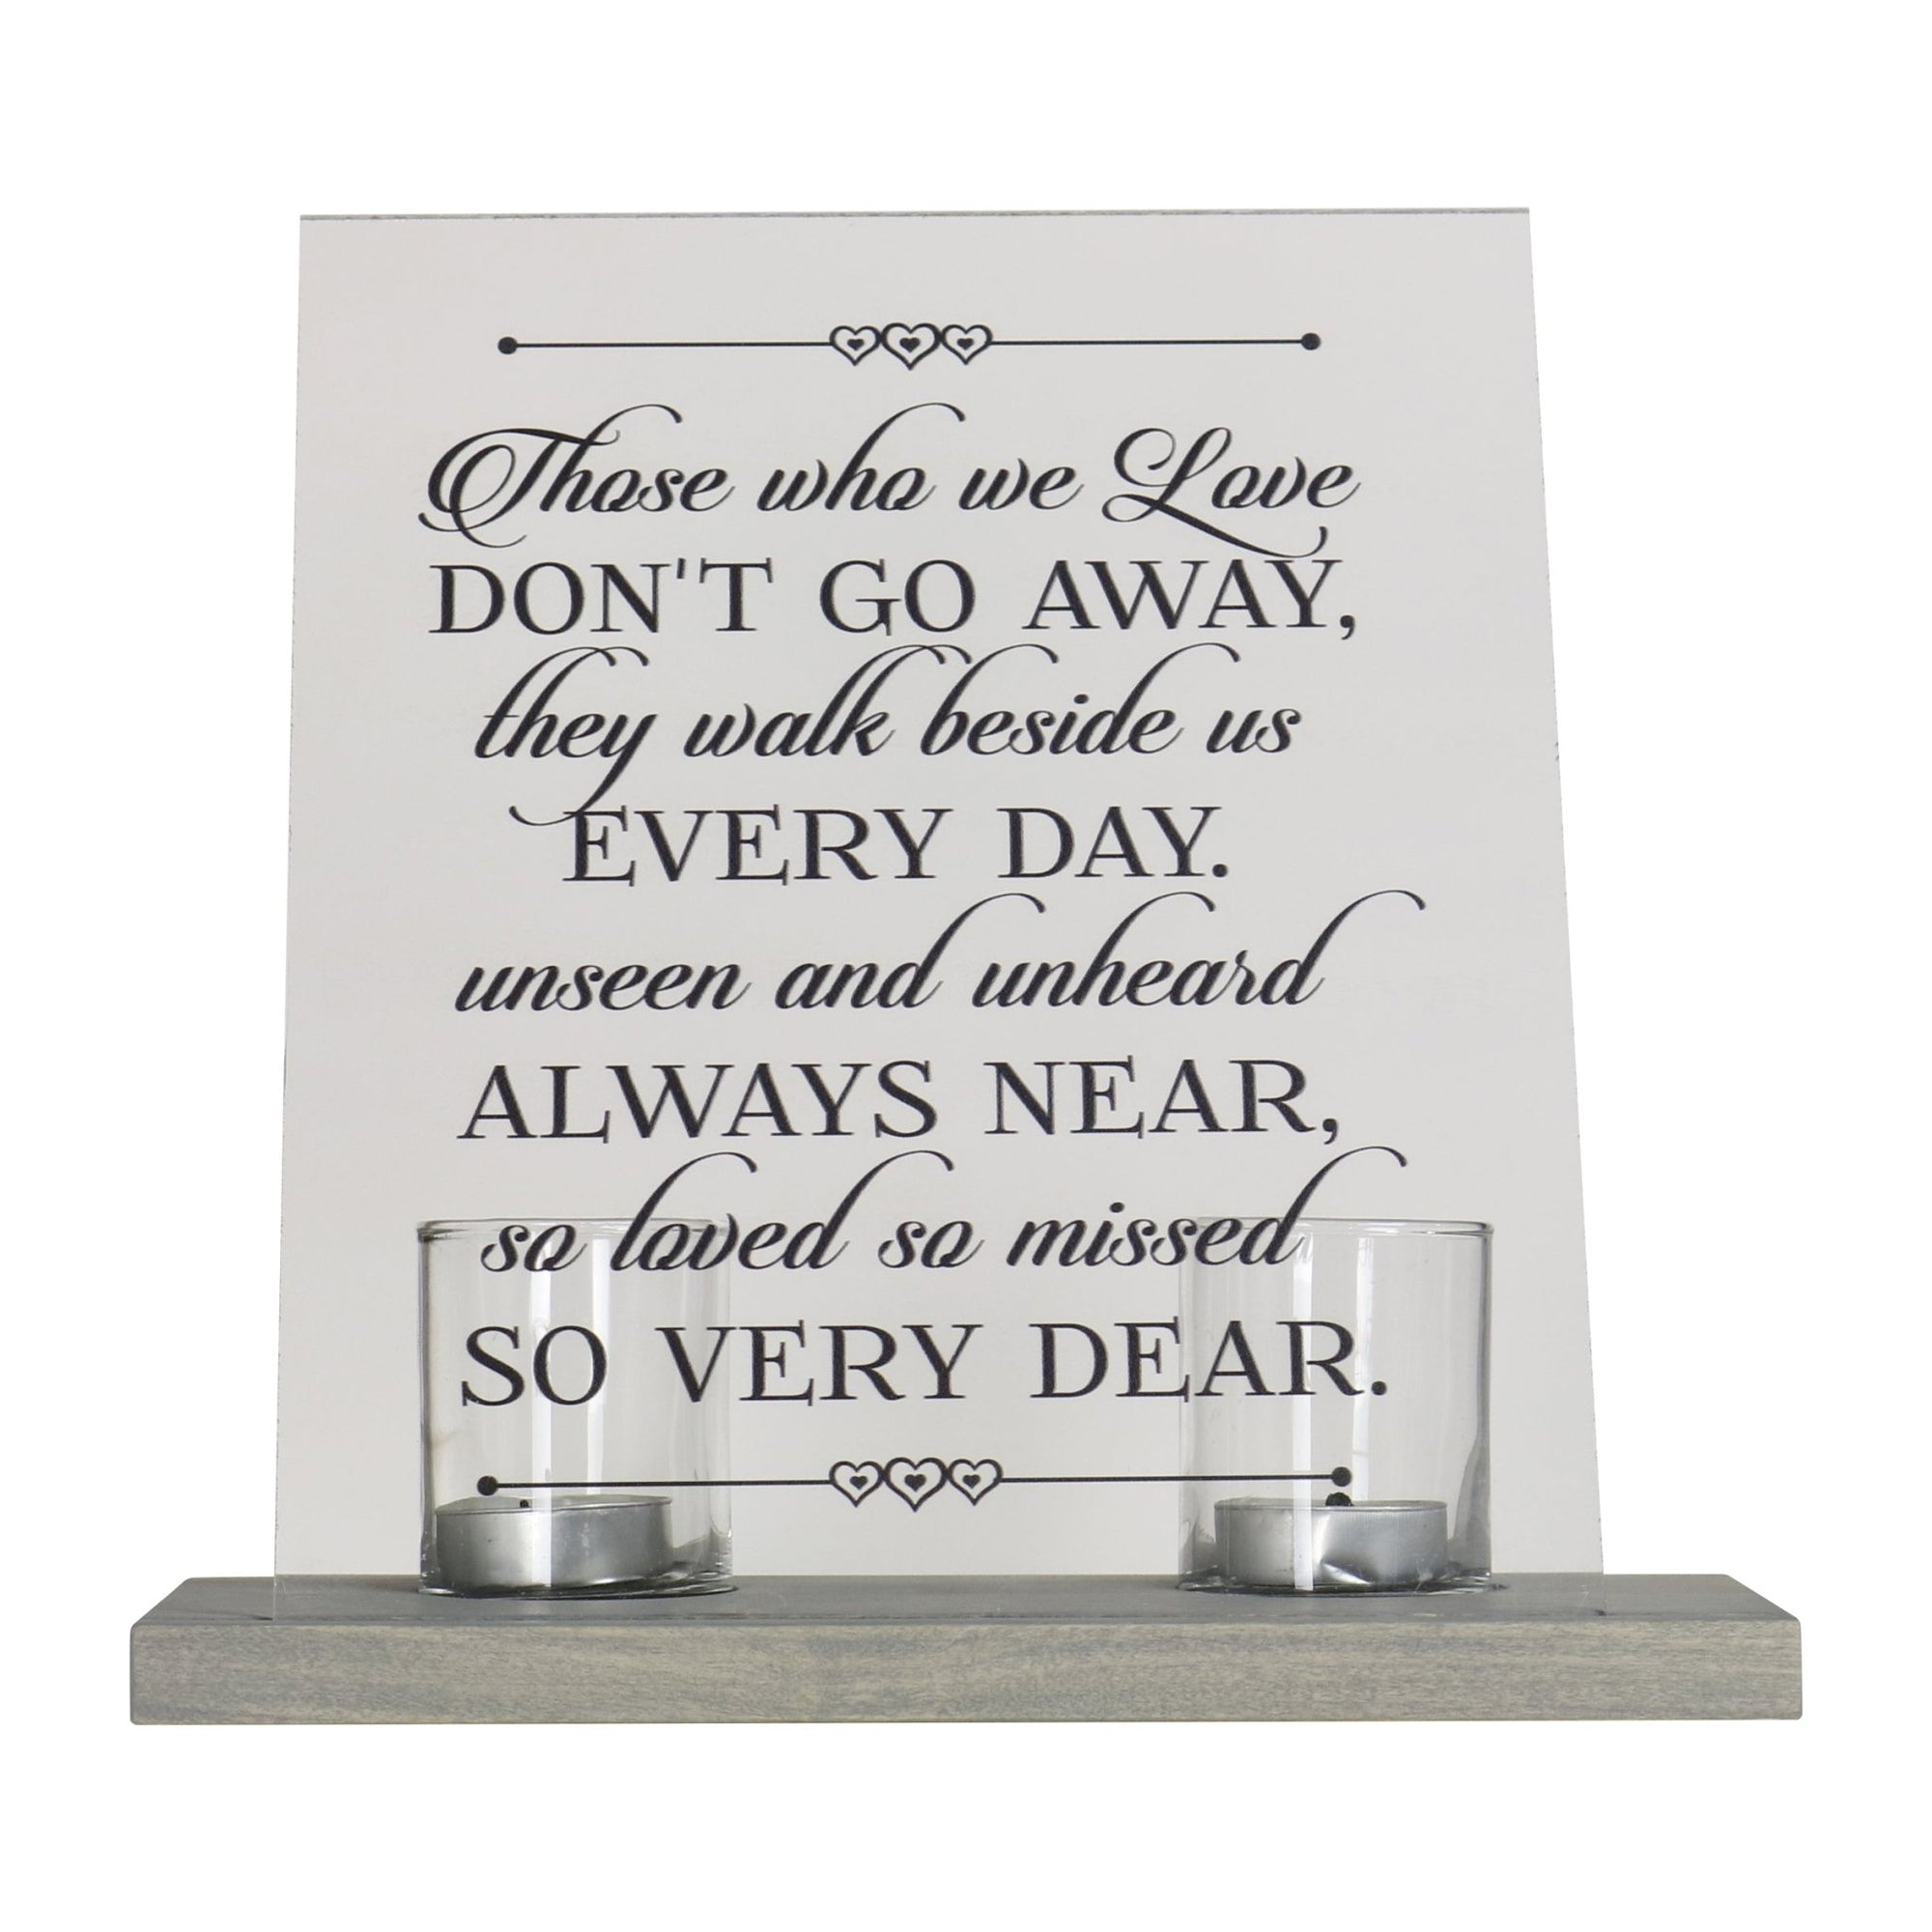 Memorial Acrylic Sign 8x10 with Votive Candle Holder Who We Love - LifeSong Milestones